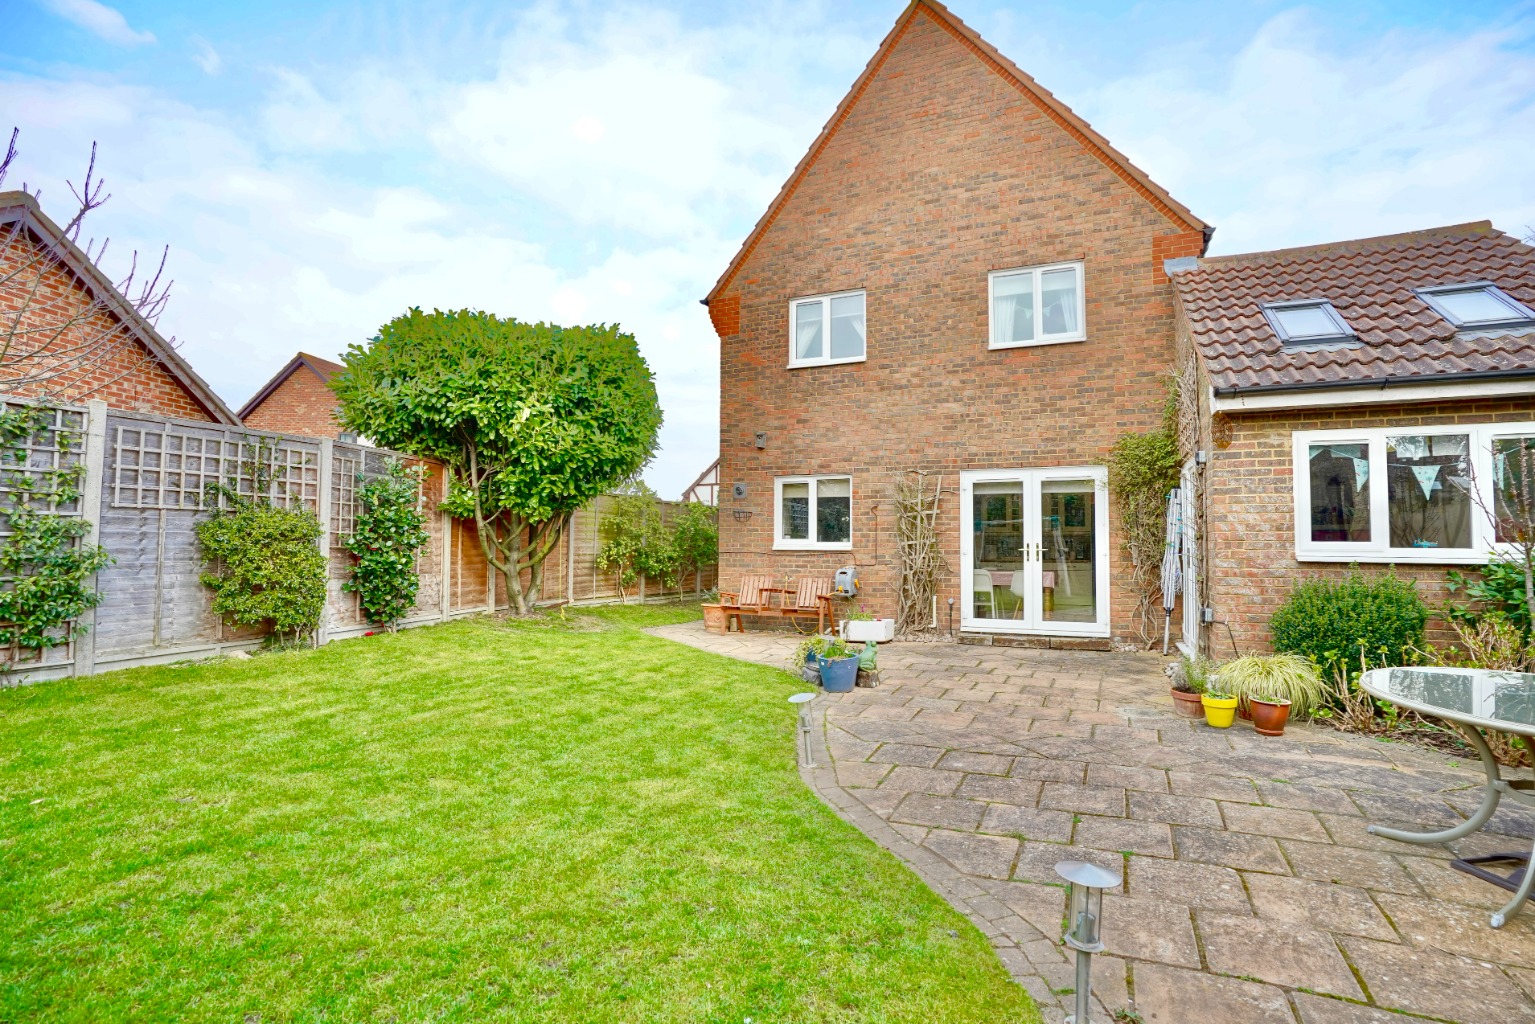 4 bed detached house for sale in Owl Way, Huntingdon 14